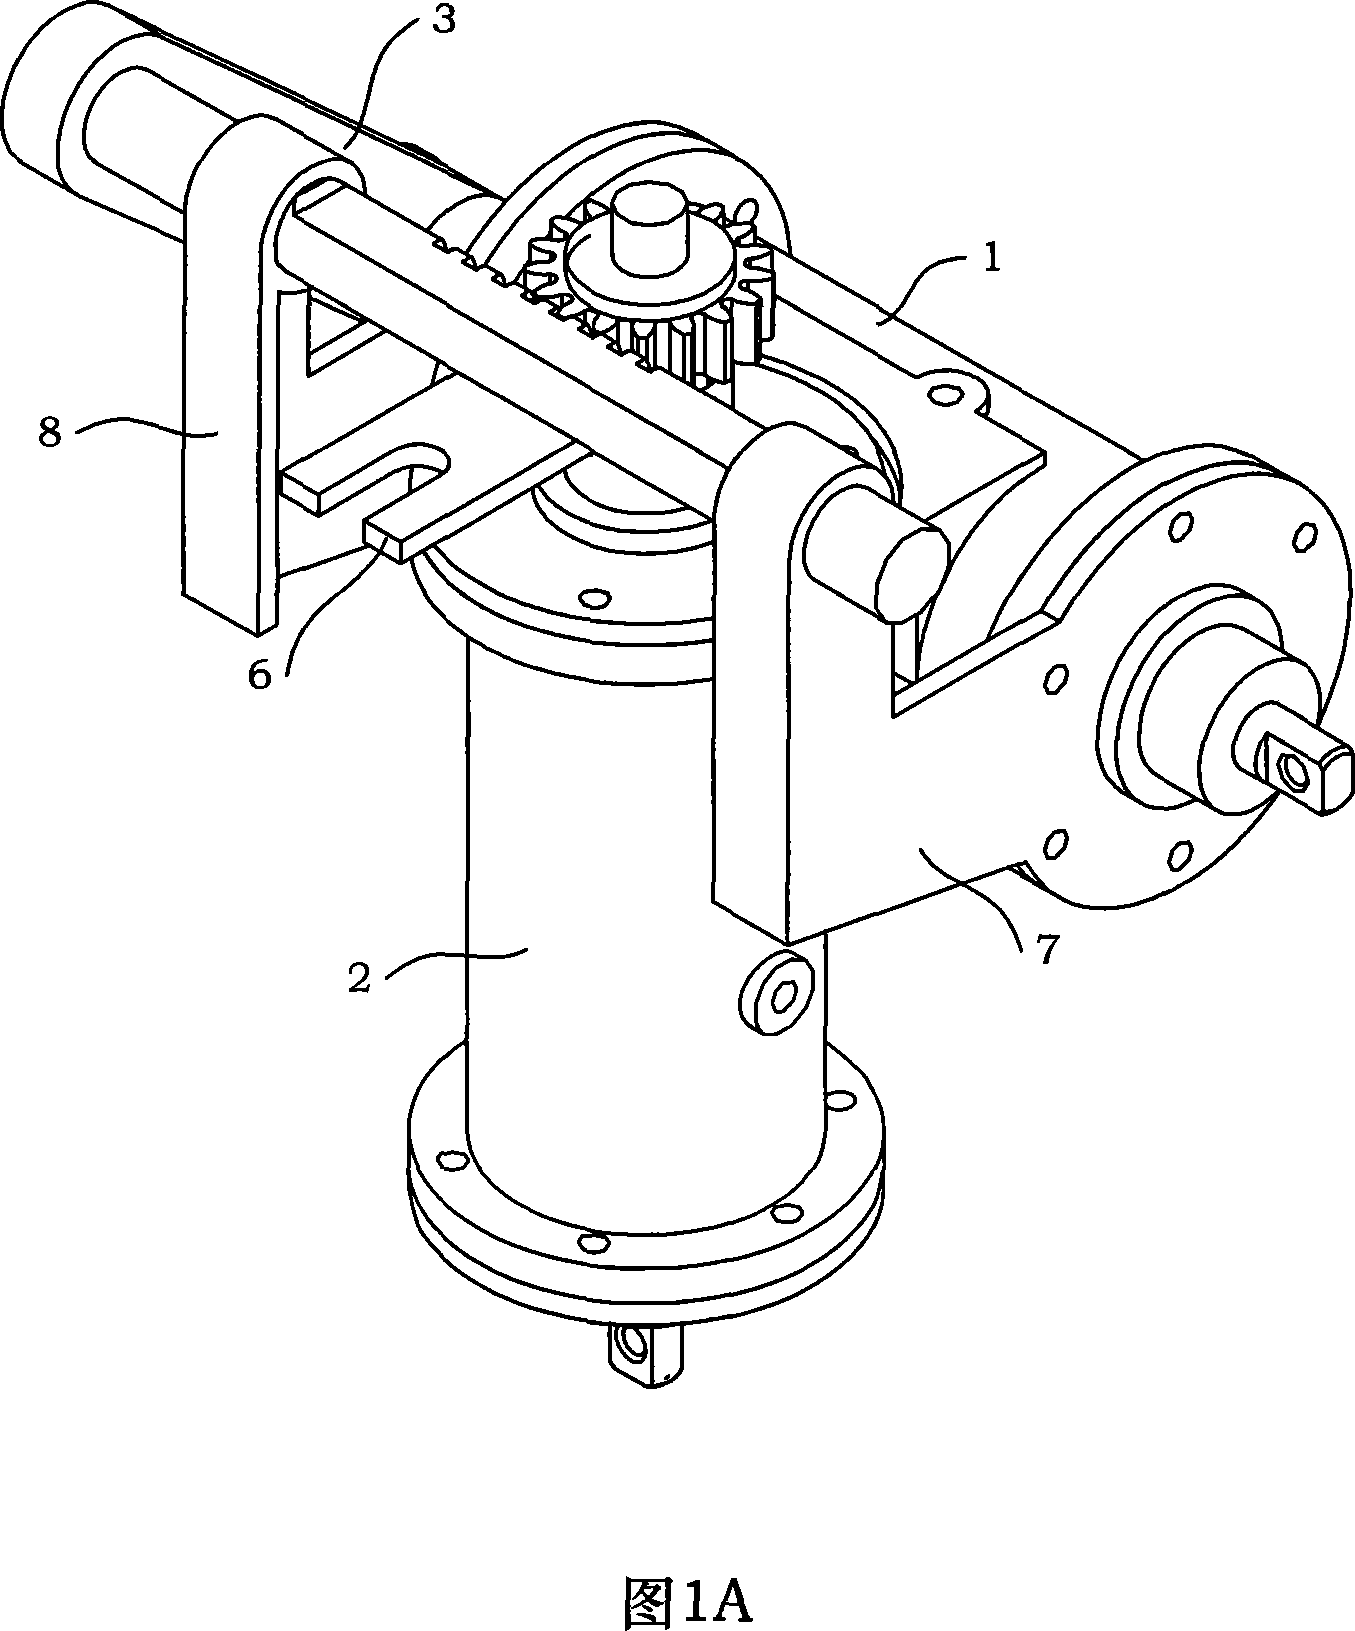 Follow-up type selecting gear shifting hydraulic actuator of vehicle automatic mechanical speed variator